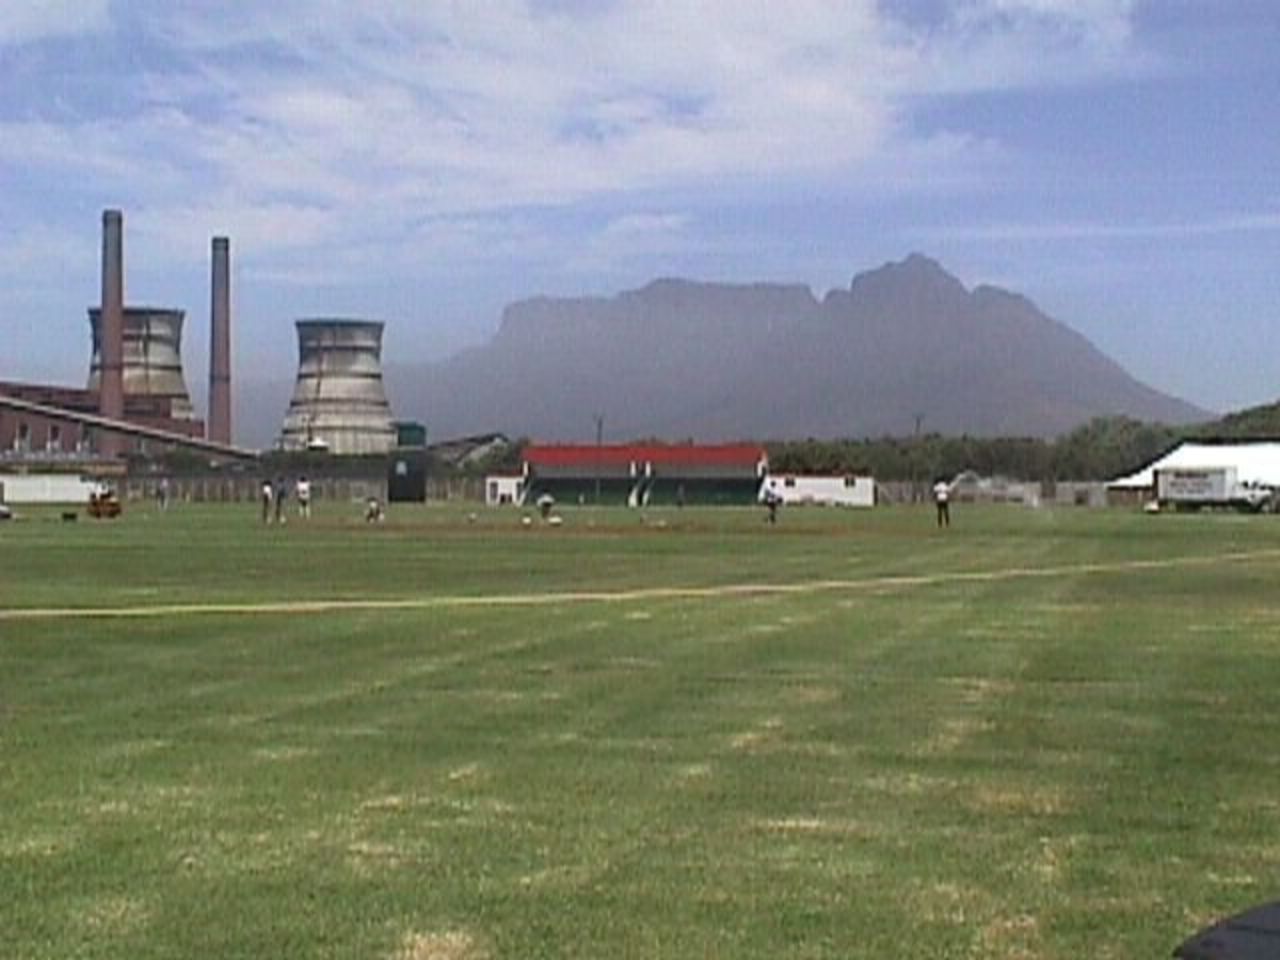 The Langa CC ground in the Langa township ( near Cape Town) , venue of the West Indies v Western Province match being played on Jan 9, '99.